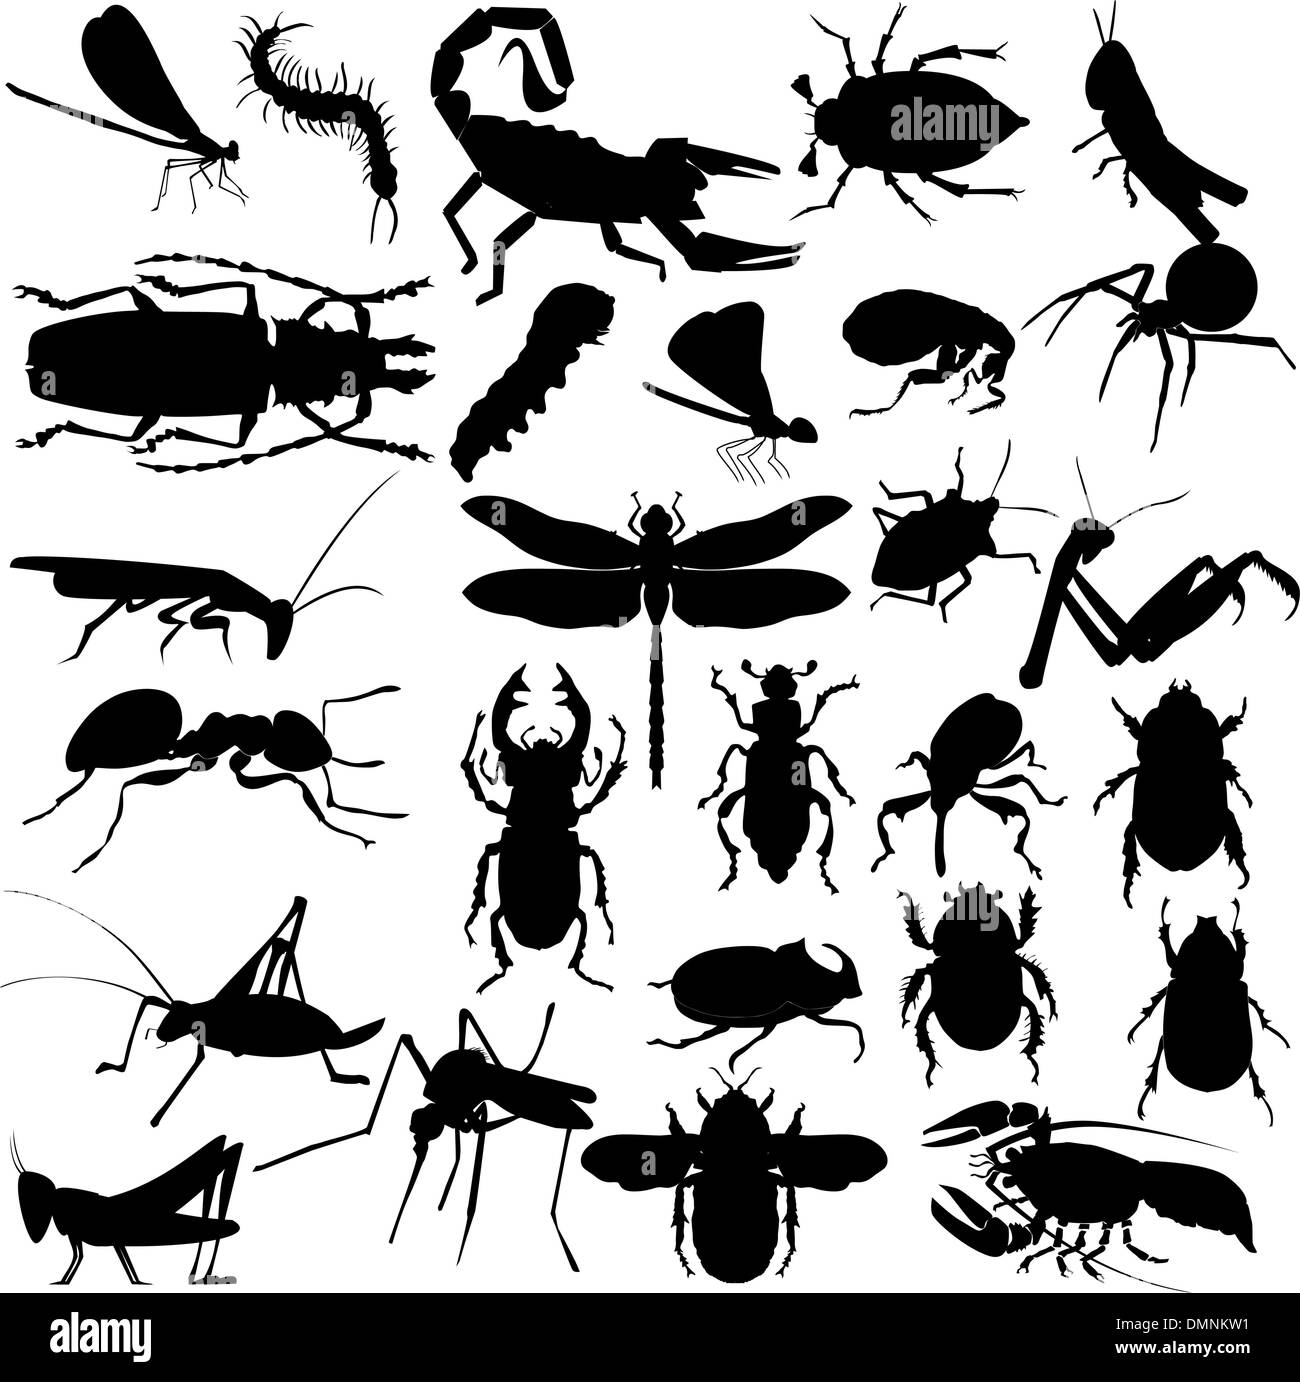 Silhouettes of insects Stock Vector